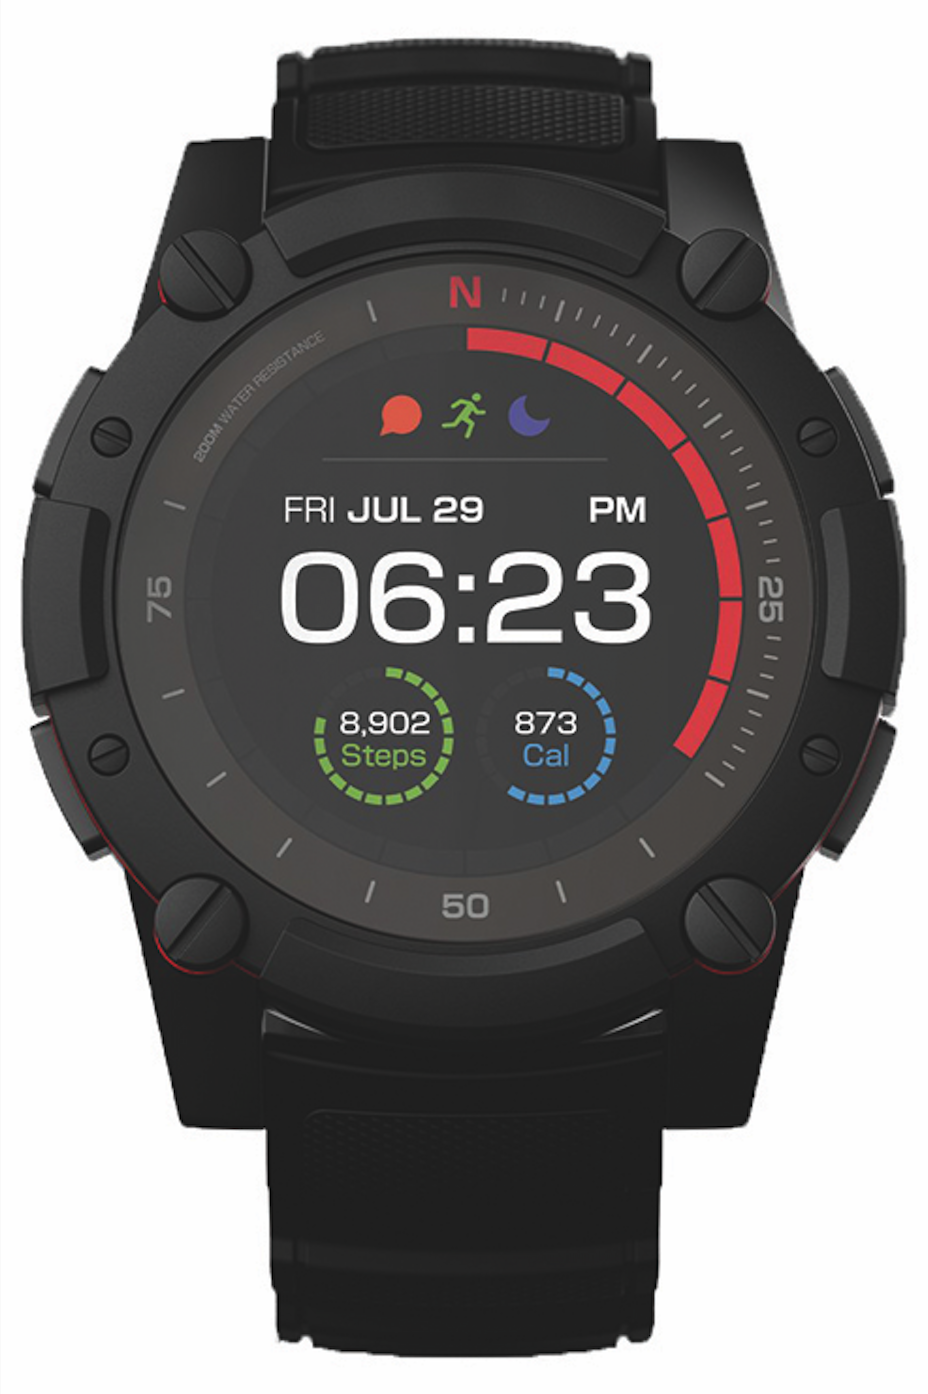 MF tests five latest outdoor and adventure watches Men's Fitness UK